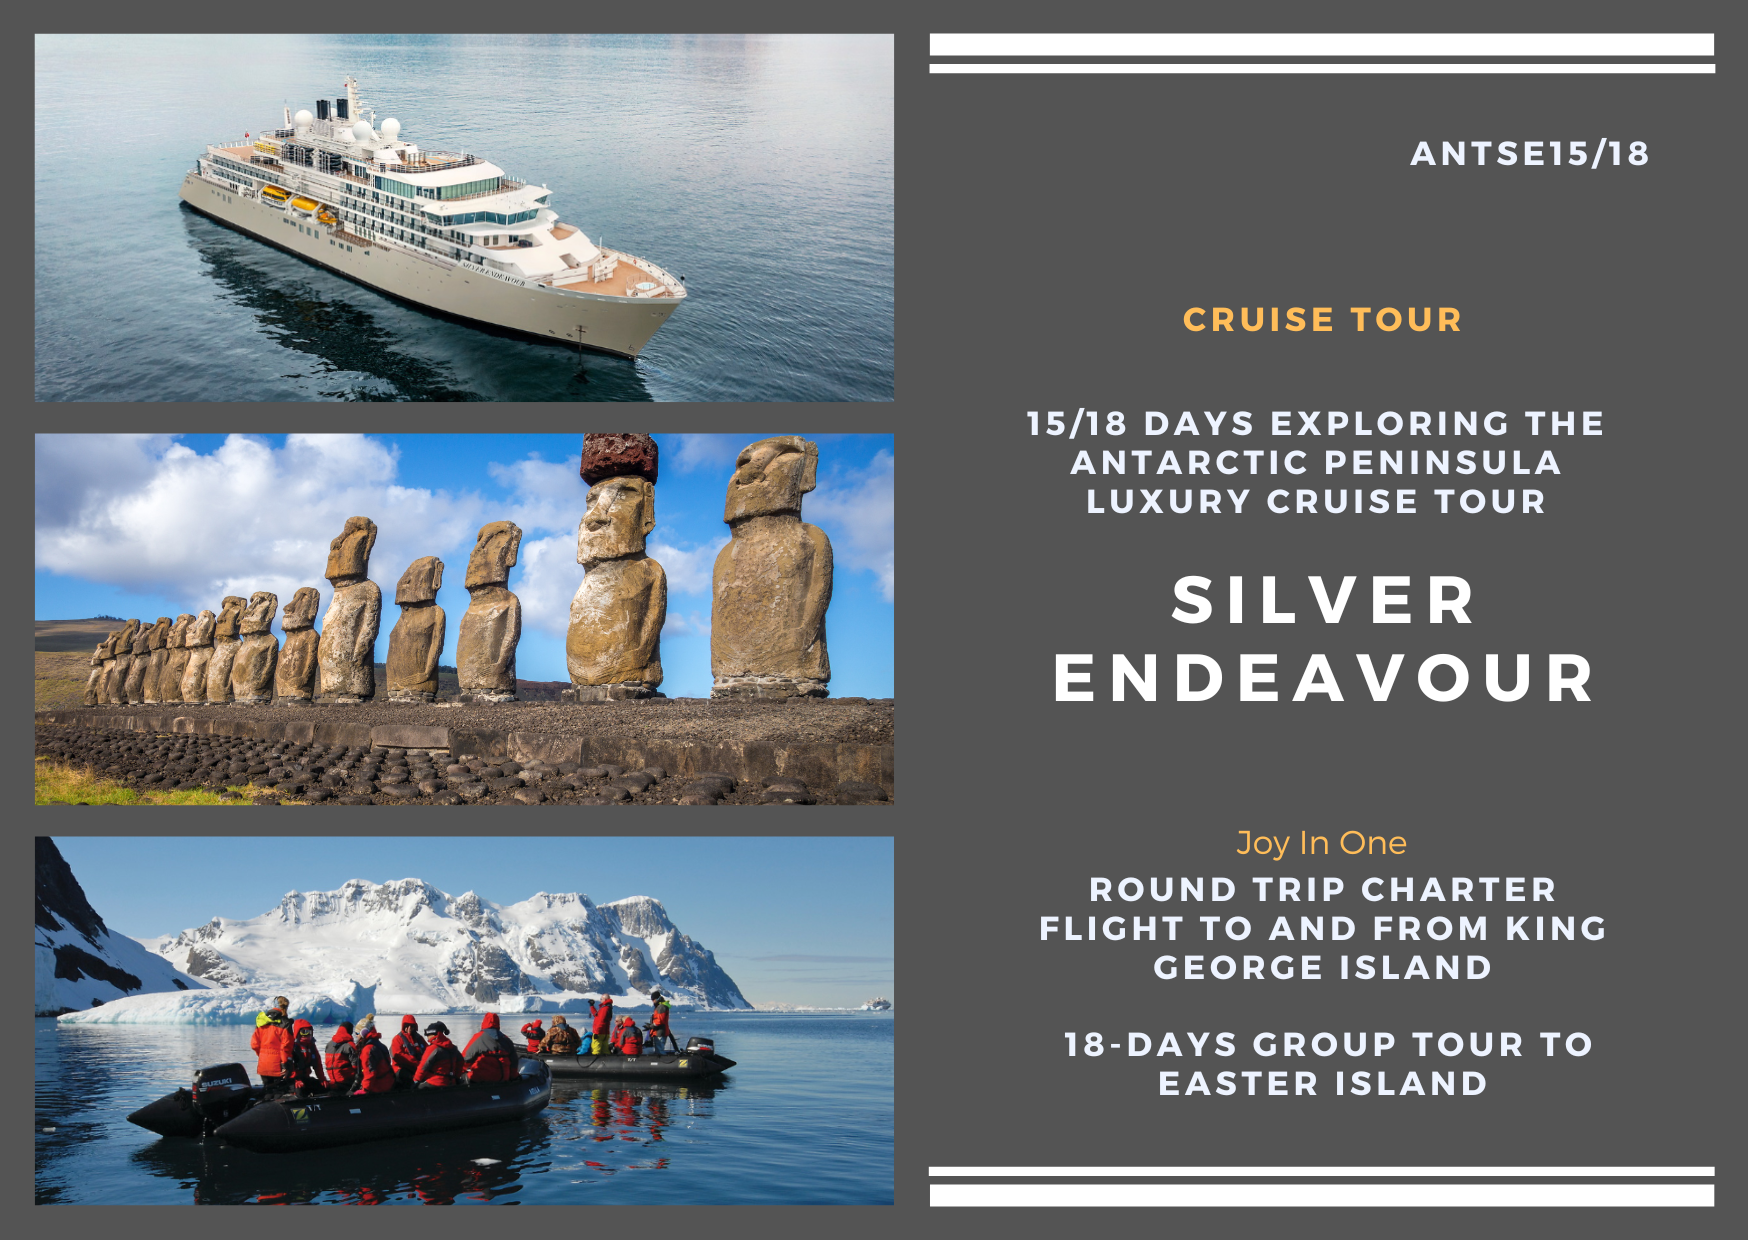 15/18 Days Explore the Antarctic Peninsula luxury cruise ship Silver Endeavor (charter flight to and from King George Island) (ANTSE15/18)